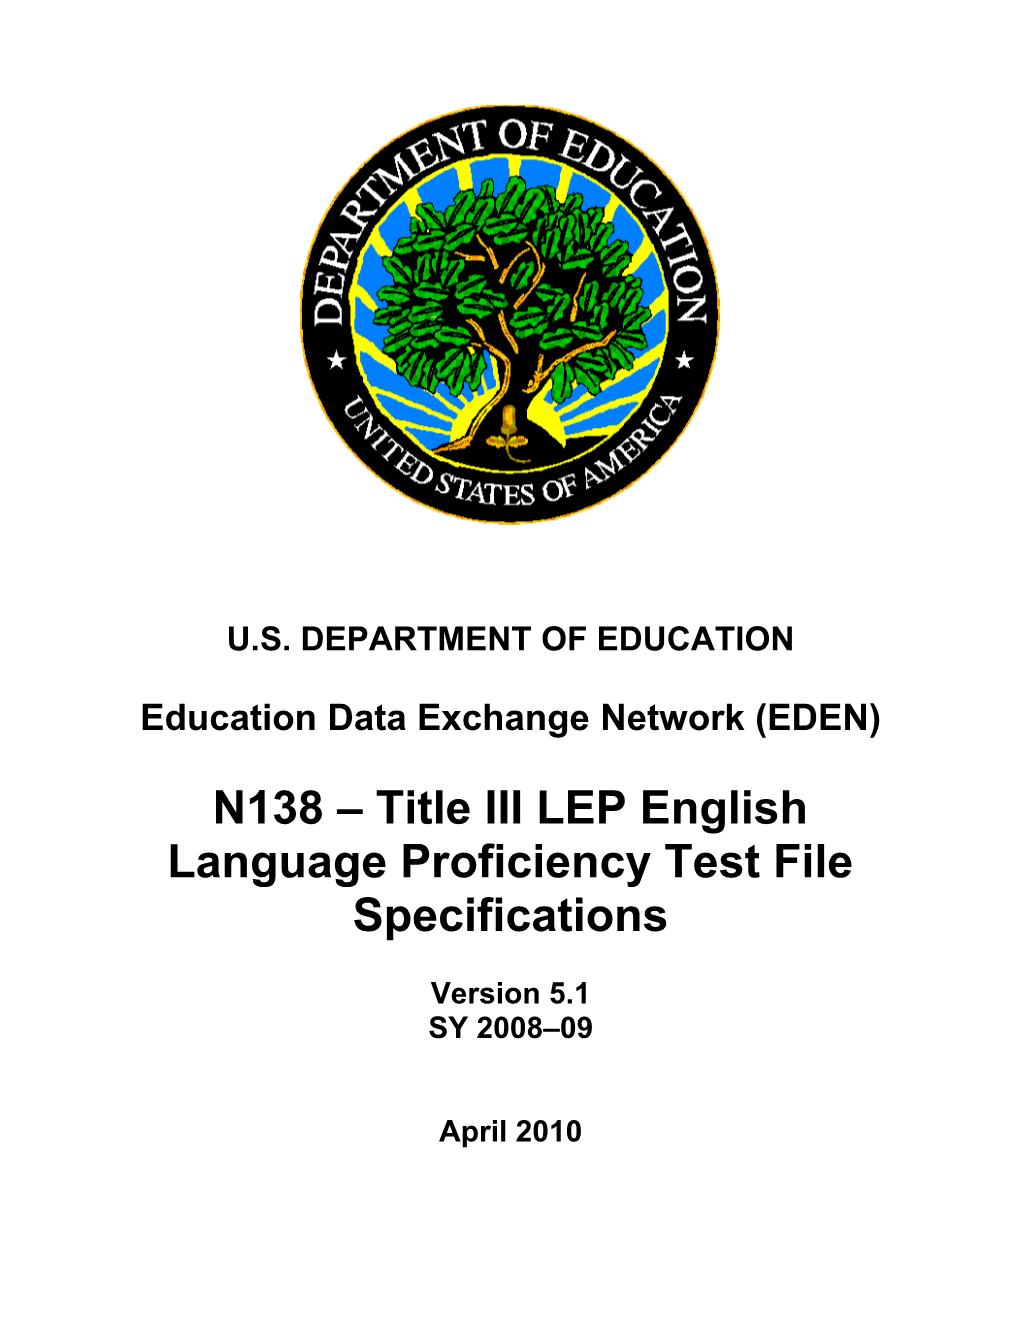 N138 Title III LEP English Language Proficiency Test XML Specifications (MS Word)